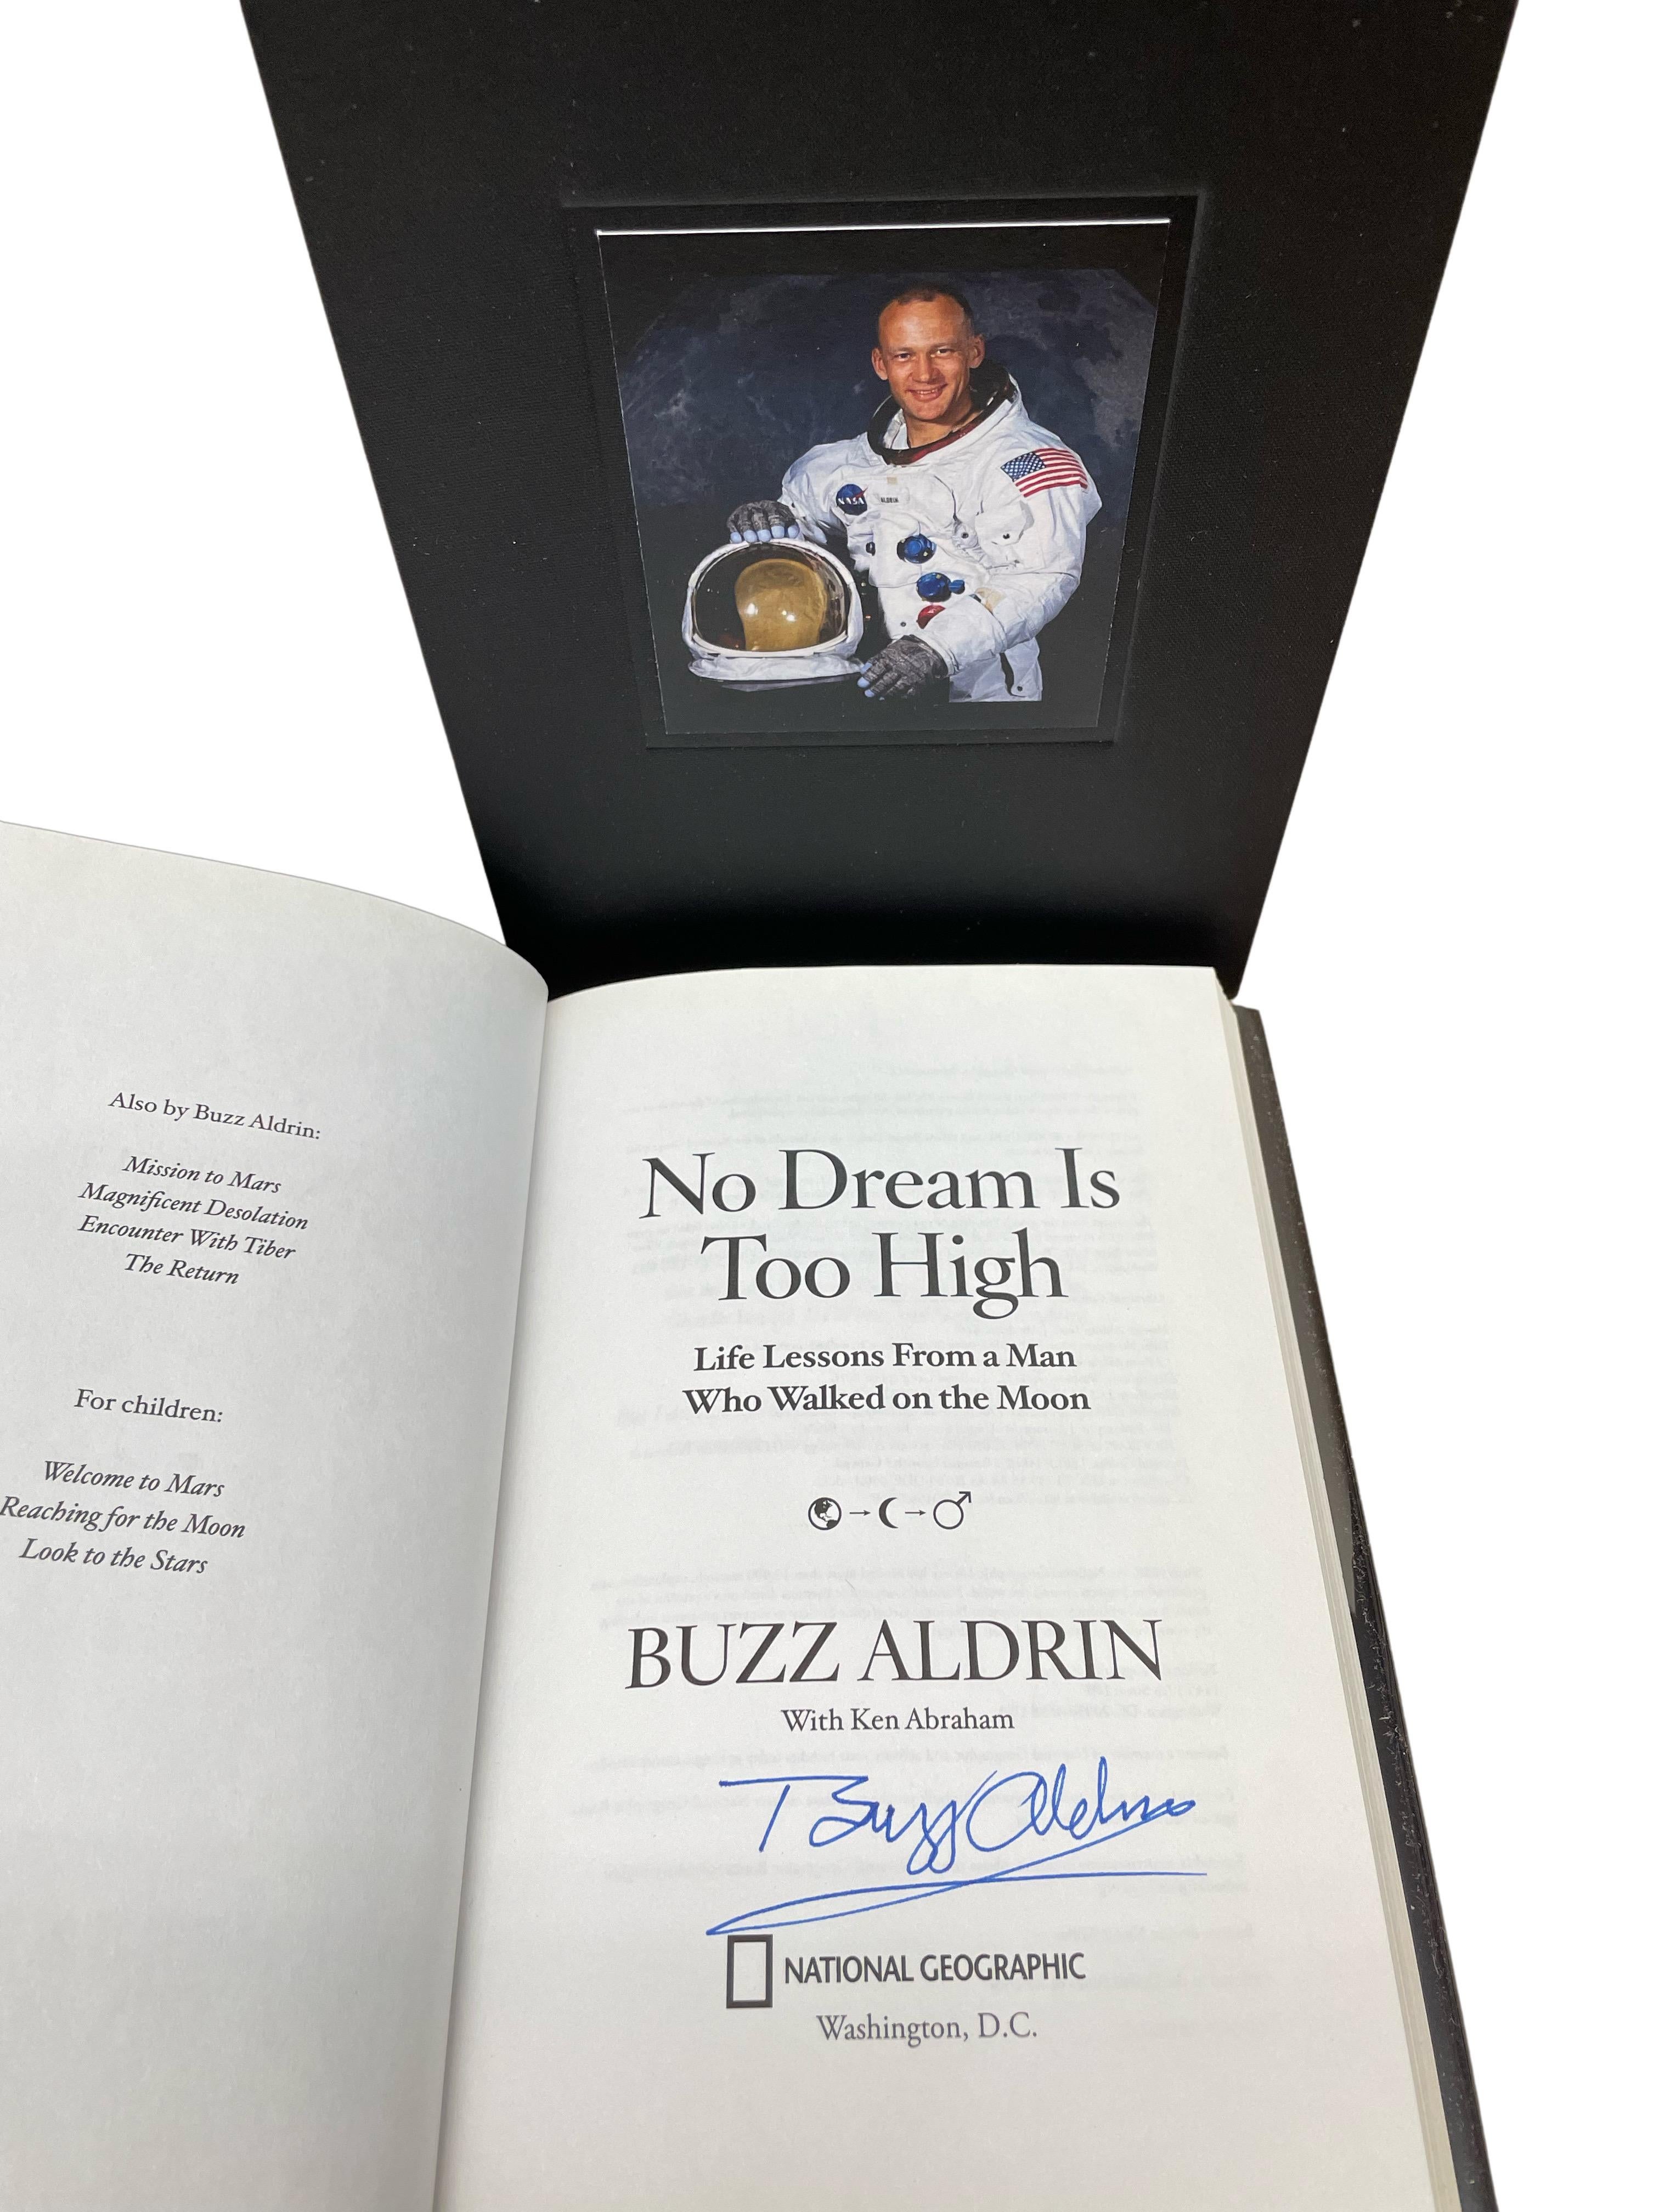 Aldrin, Buzz, with Keith Abraham. No Dream Is Too High: Life Lessons From a Man Who Walked on the Moon. Washington: National Geographic, 2016. First Edition. Signed by Aldrin on the full title page. In publisher's black and gray boards and original